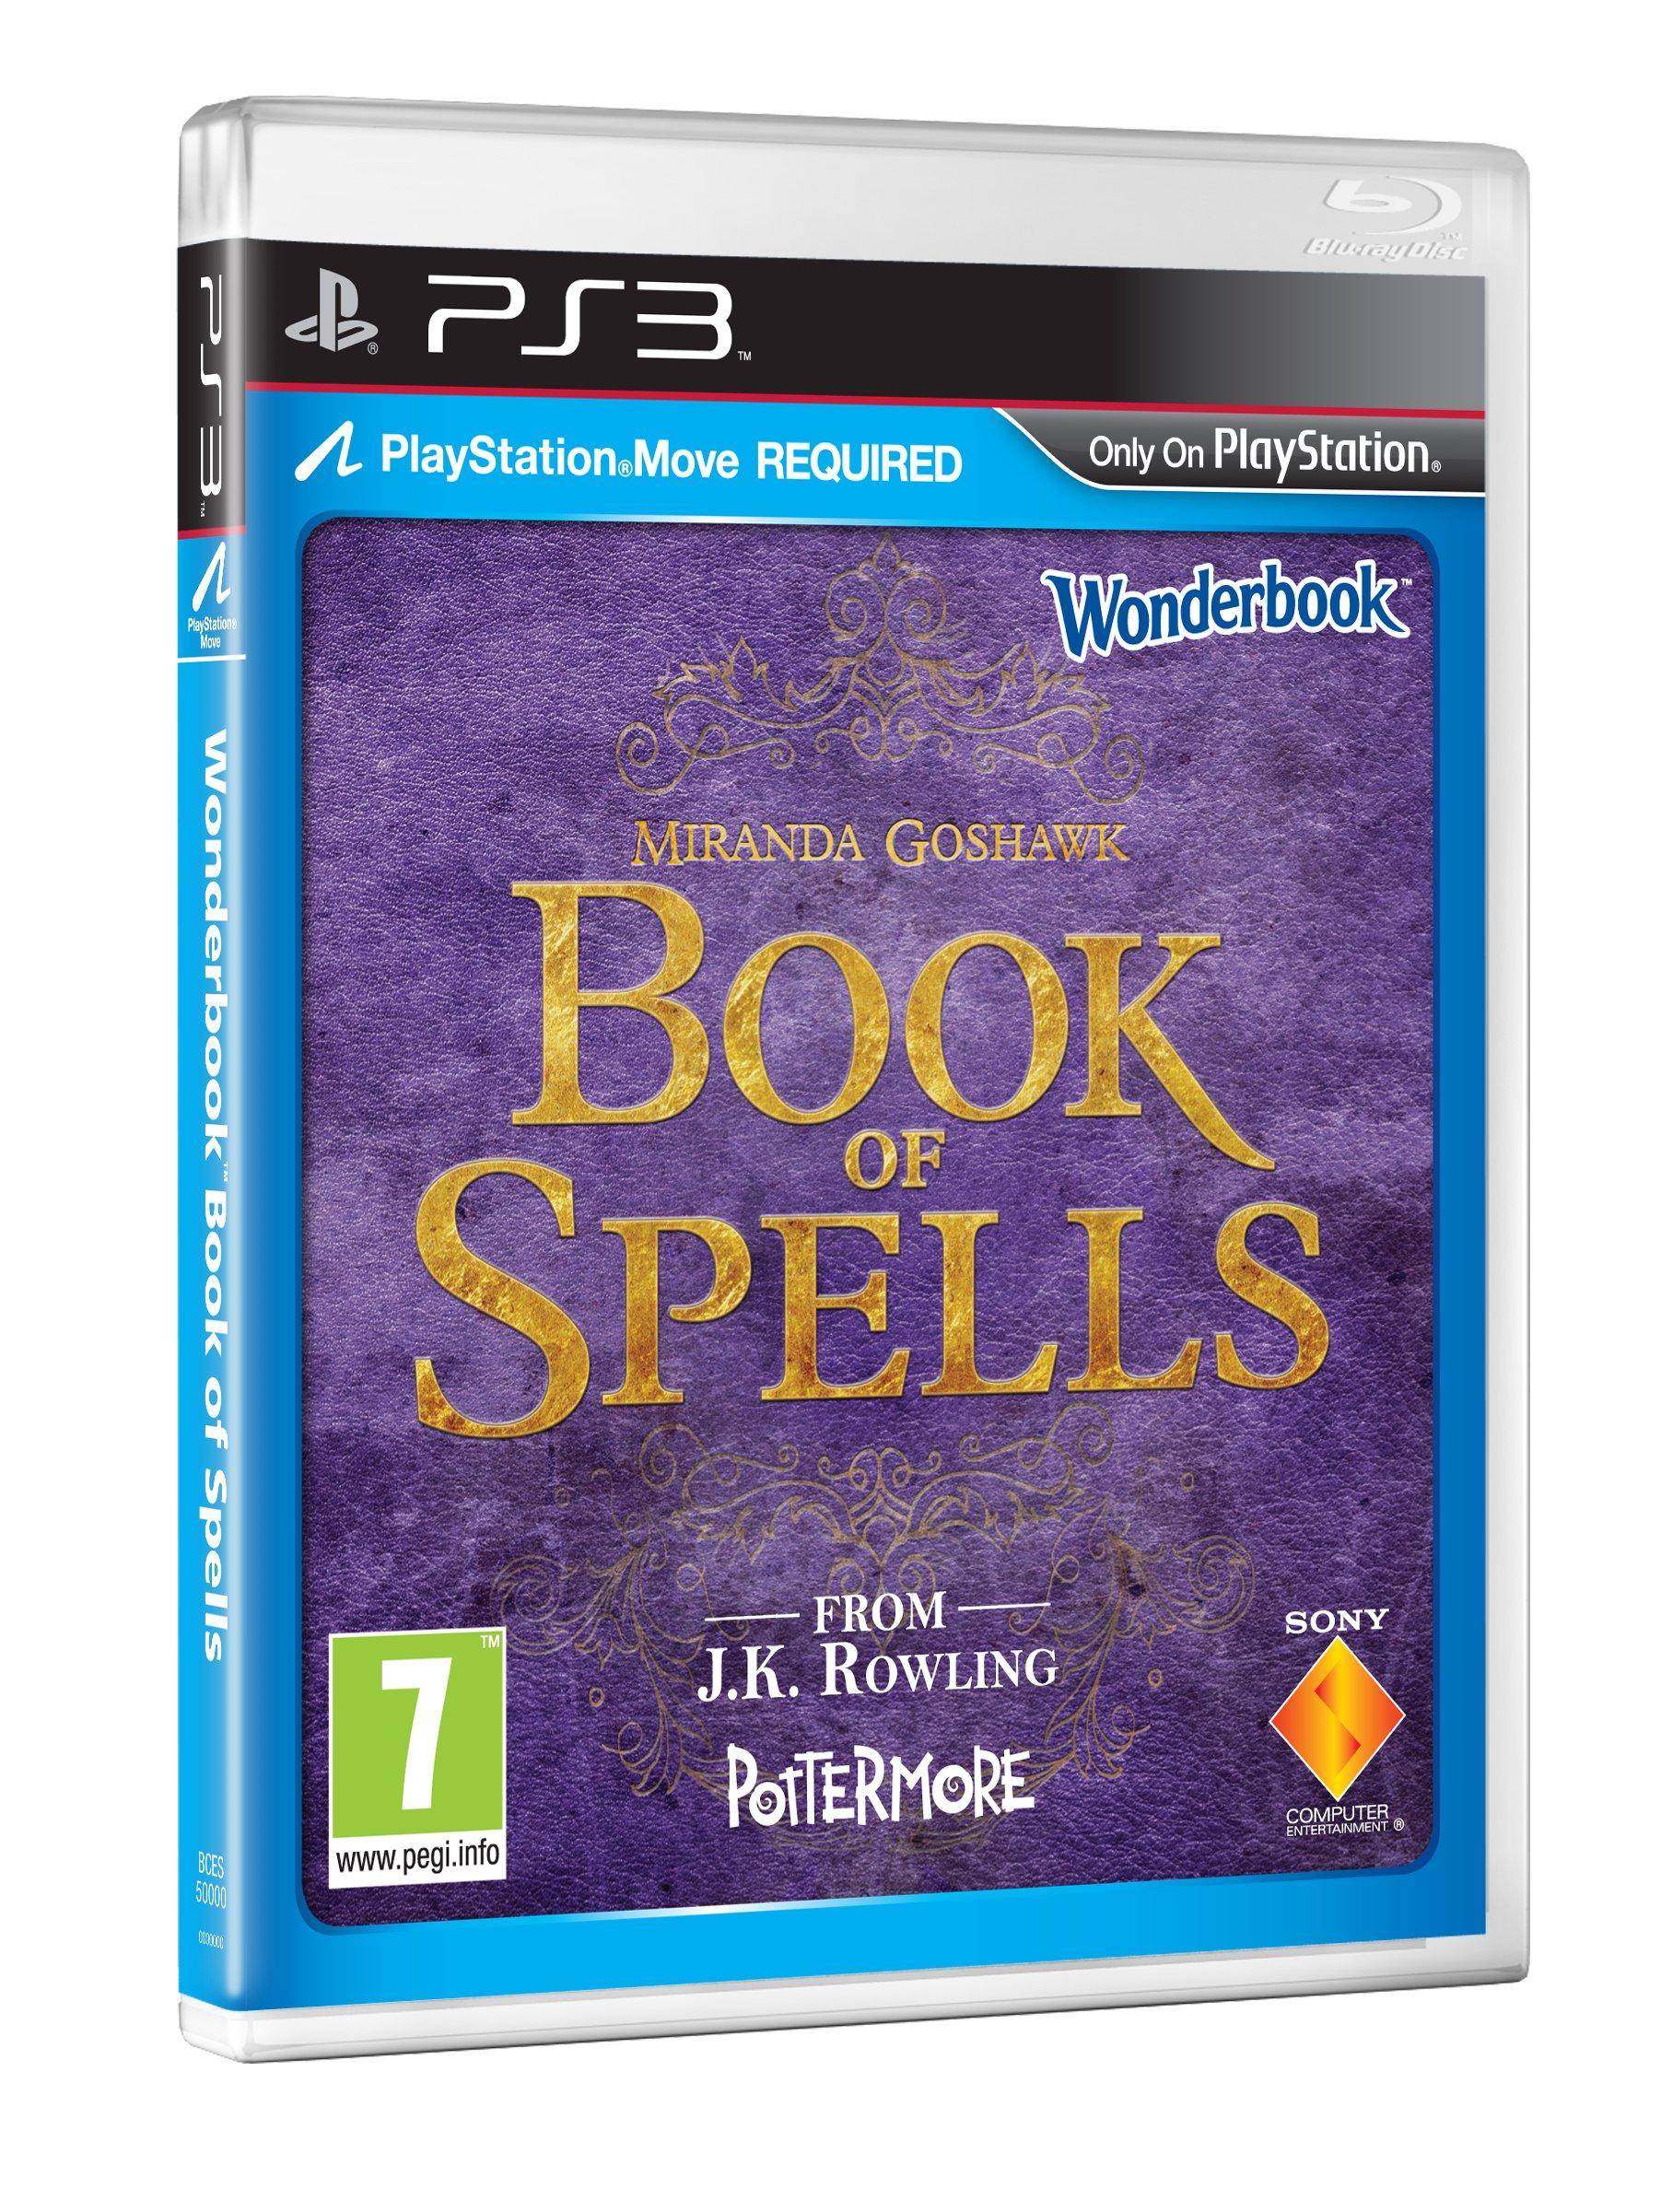 Expat Family Fun Idea For Easter: Sony PS3 Book Of Spells